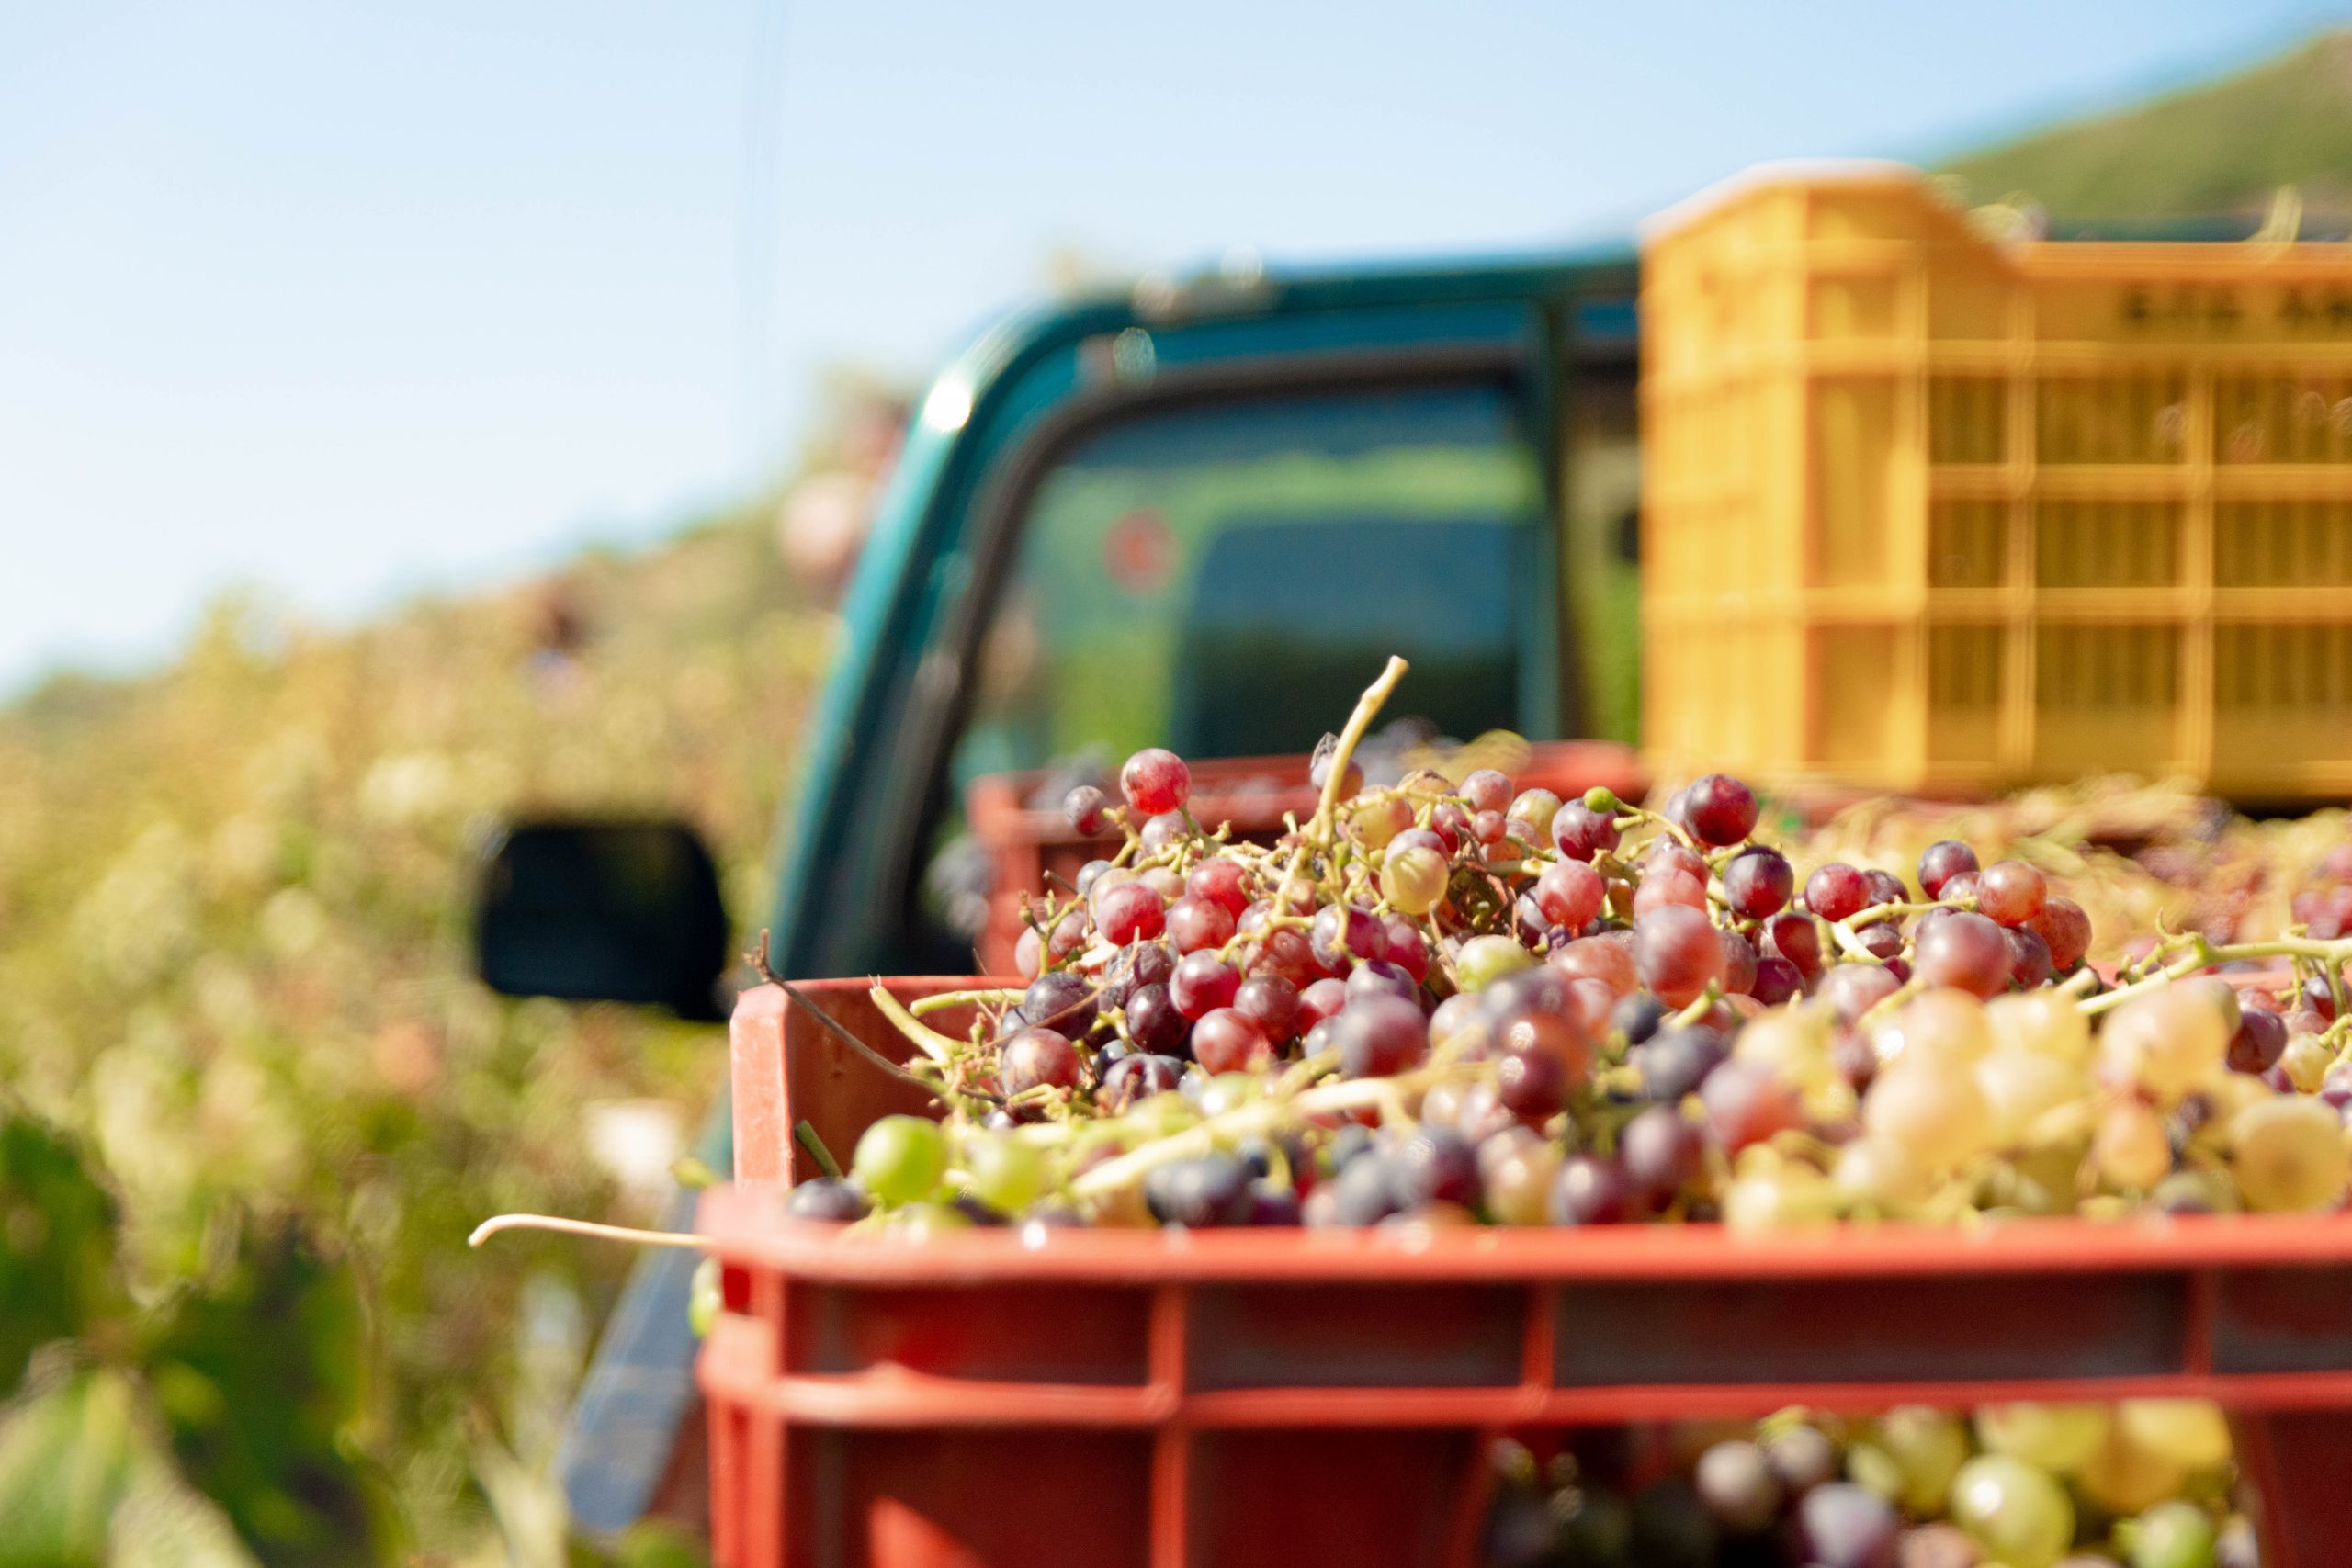 Wine producer image of grapes on a truck